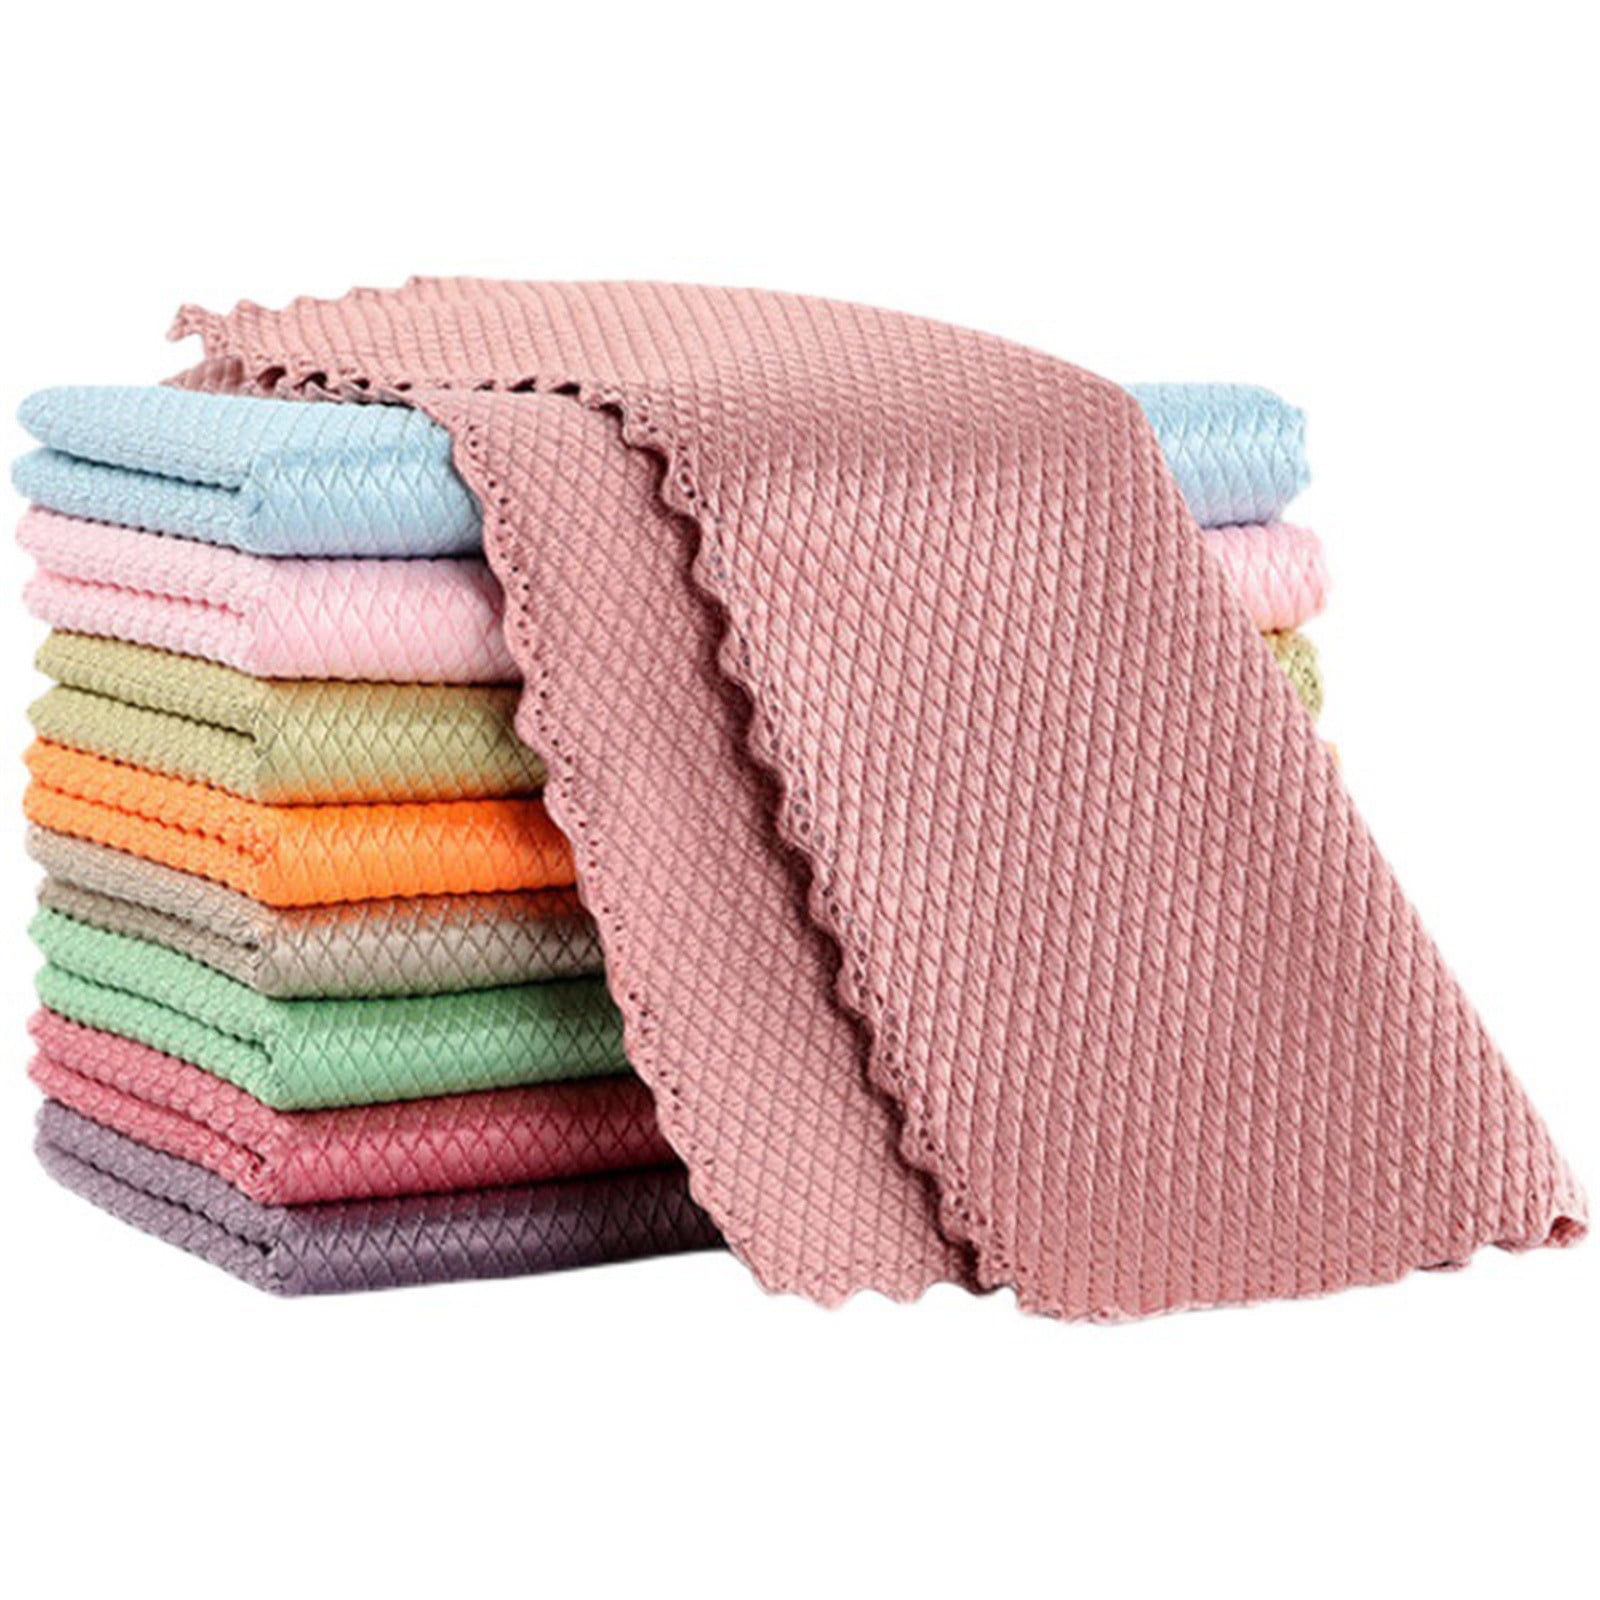 Geometry Microfiber Kitchen Towels Review